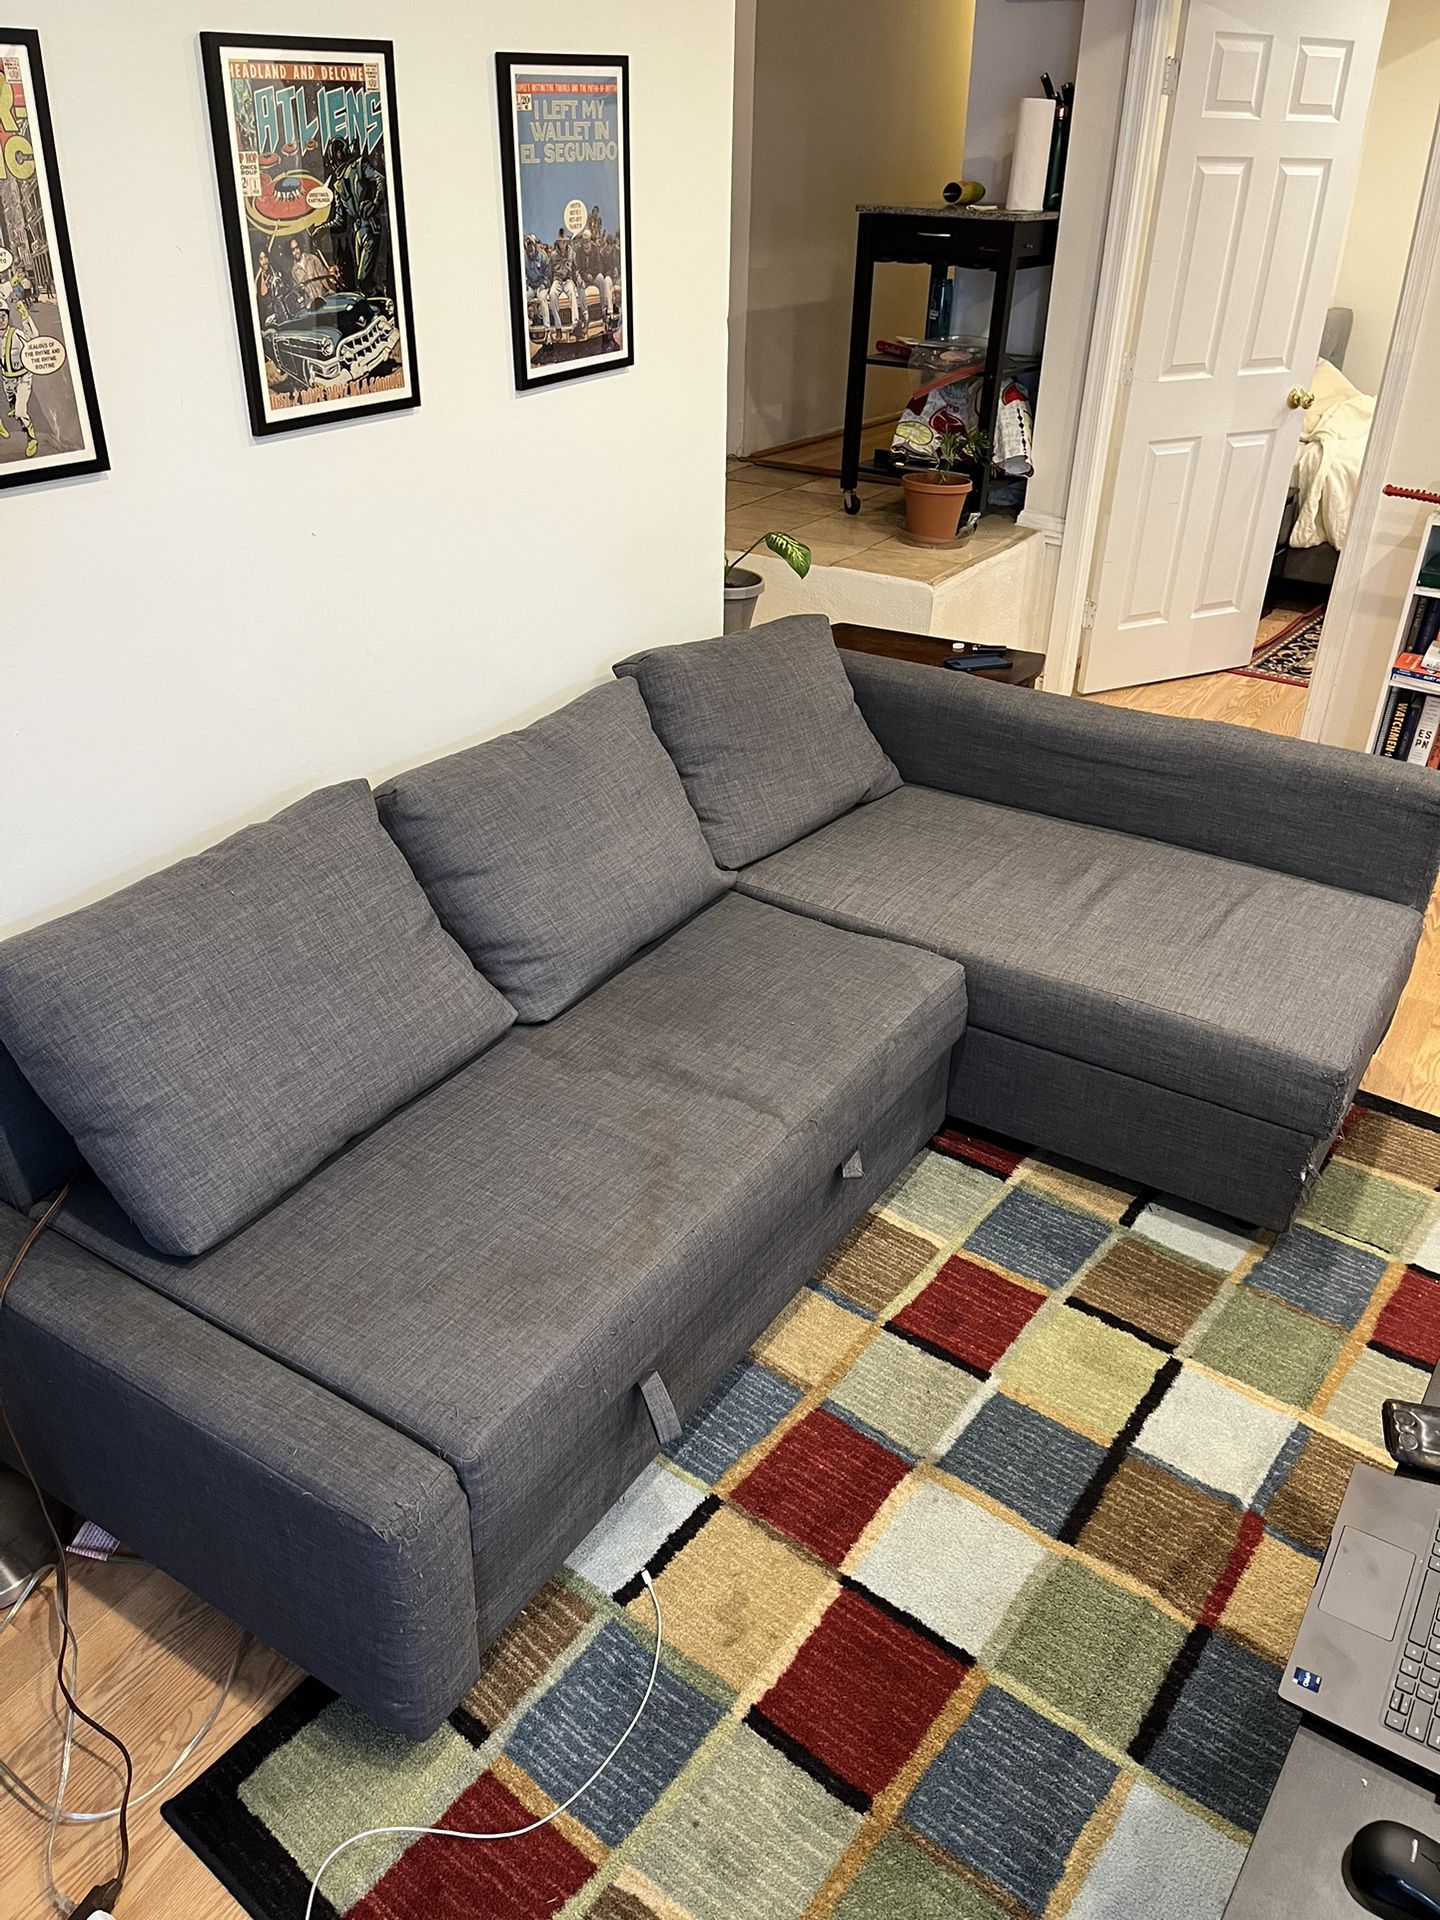 Used Sectional Couch Great For Group Home